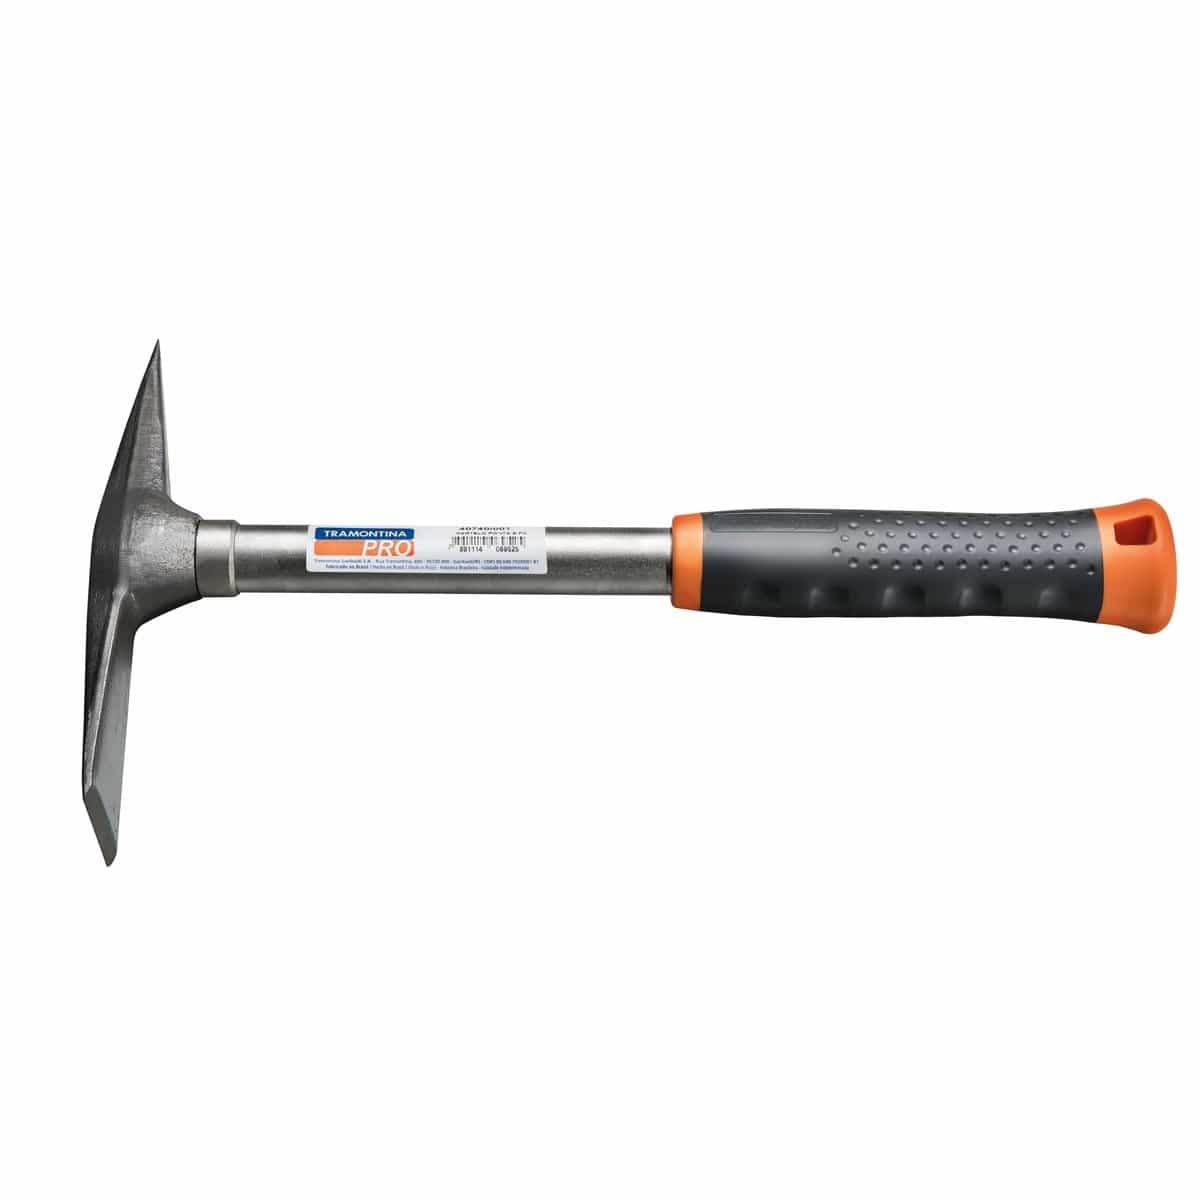 Tramontina Flat and Pointed Head Tubular Handle Hammer 500g